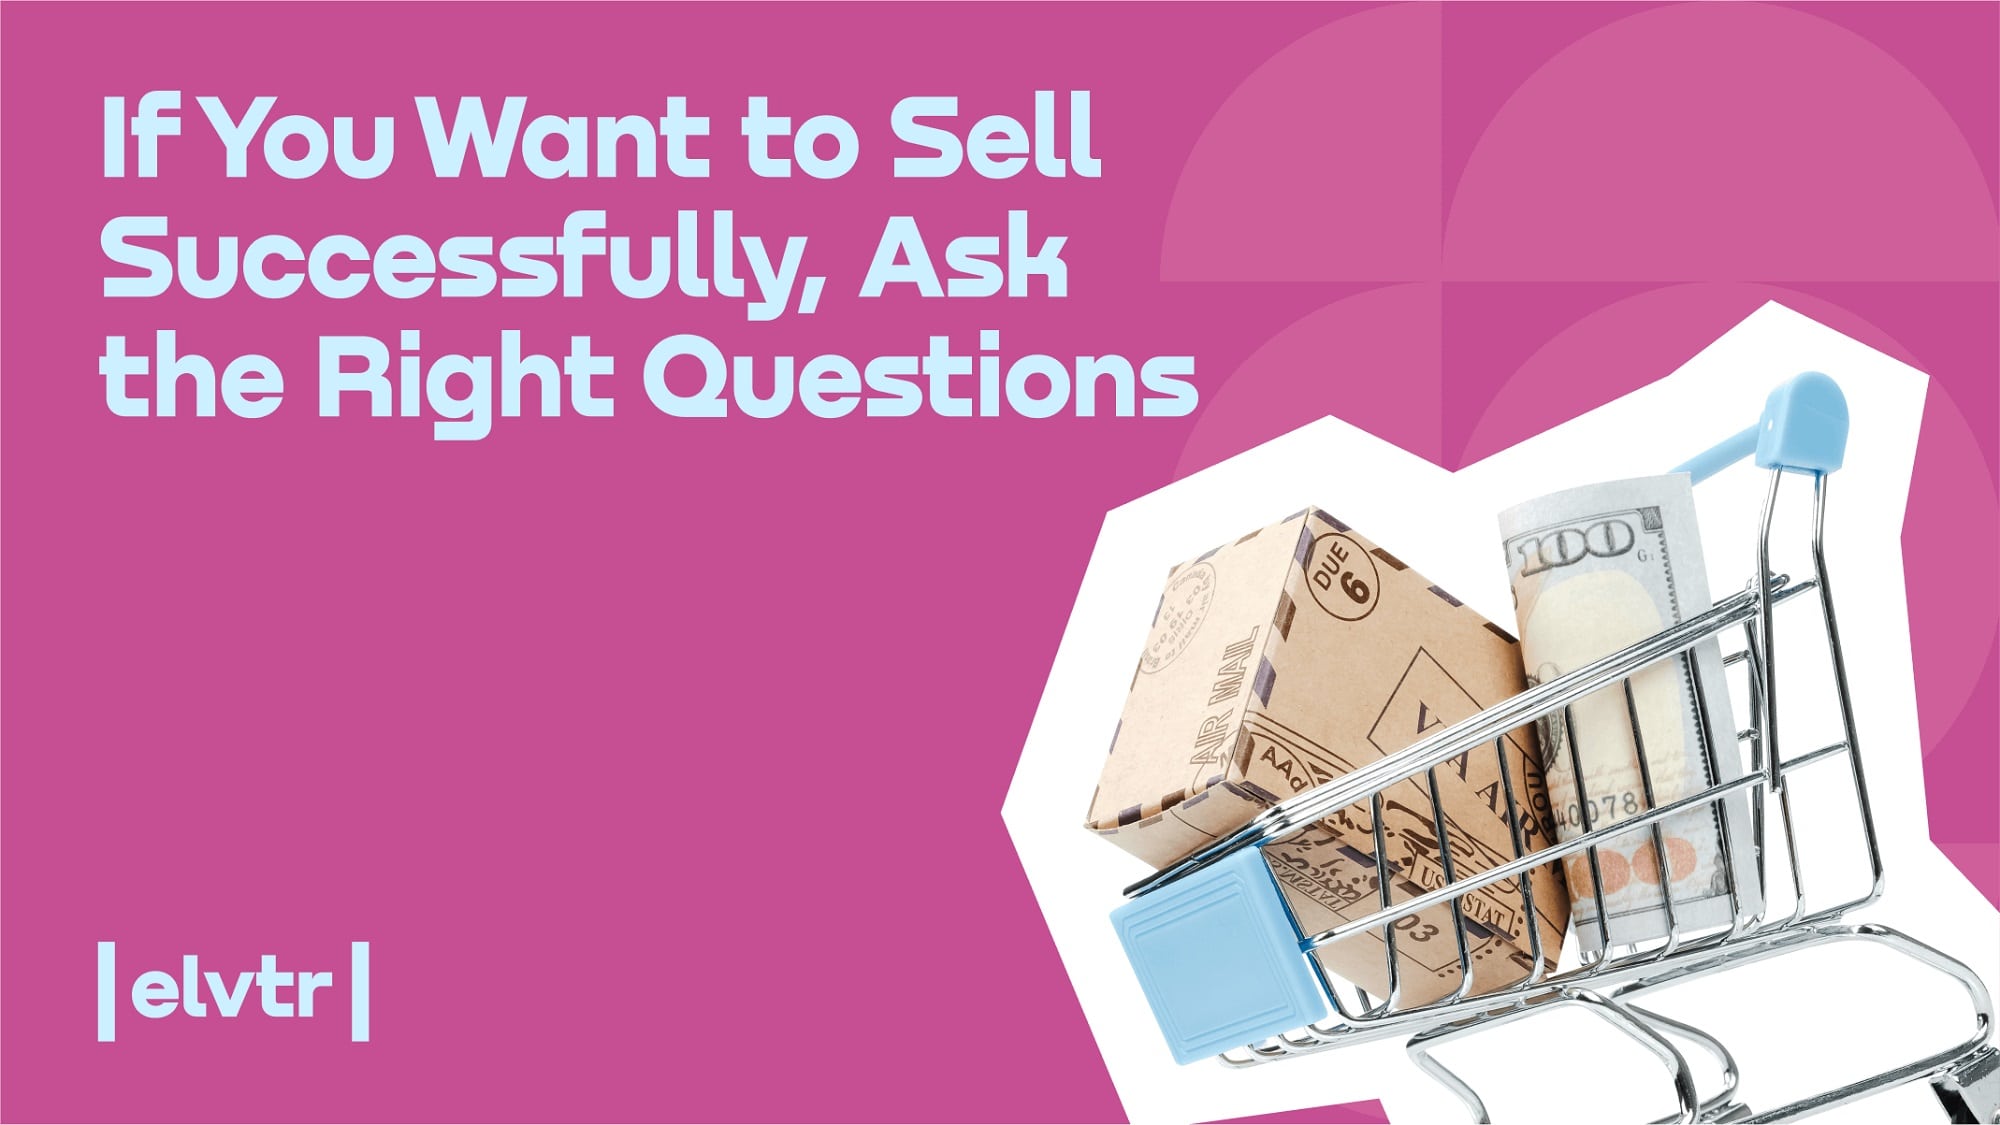 If You Want to Sell Successfully, Ask the Right Questions image